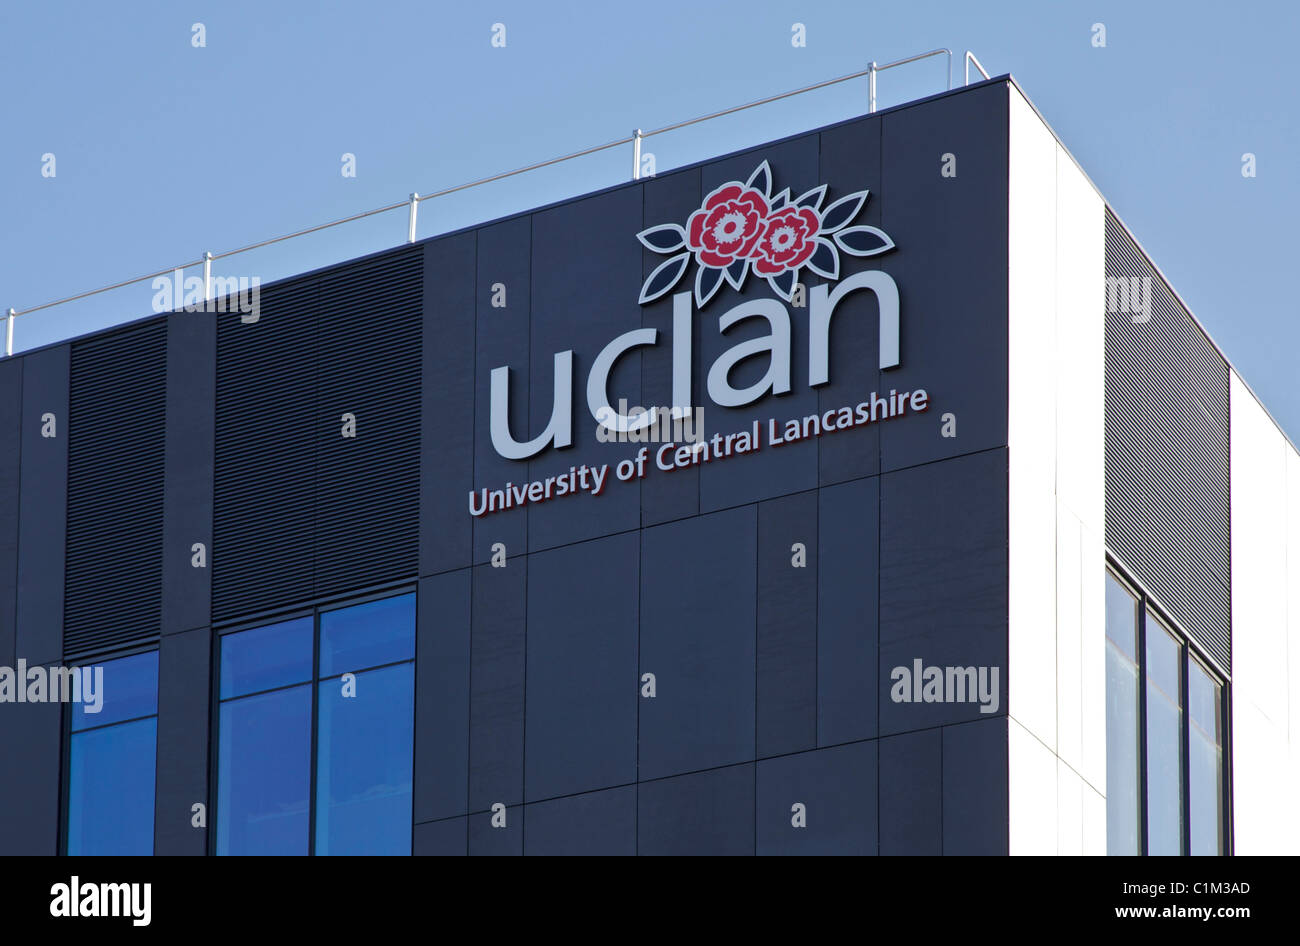 uclan university of Central Lancashire sign on building Stock Photo